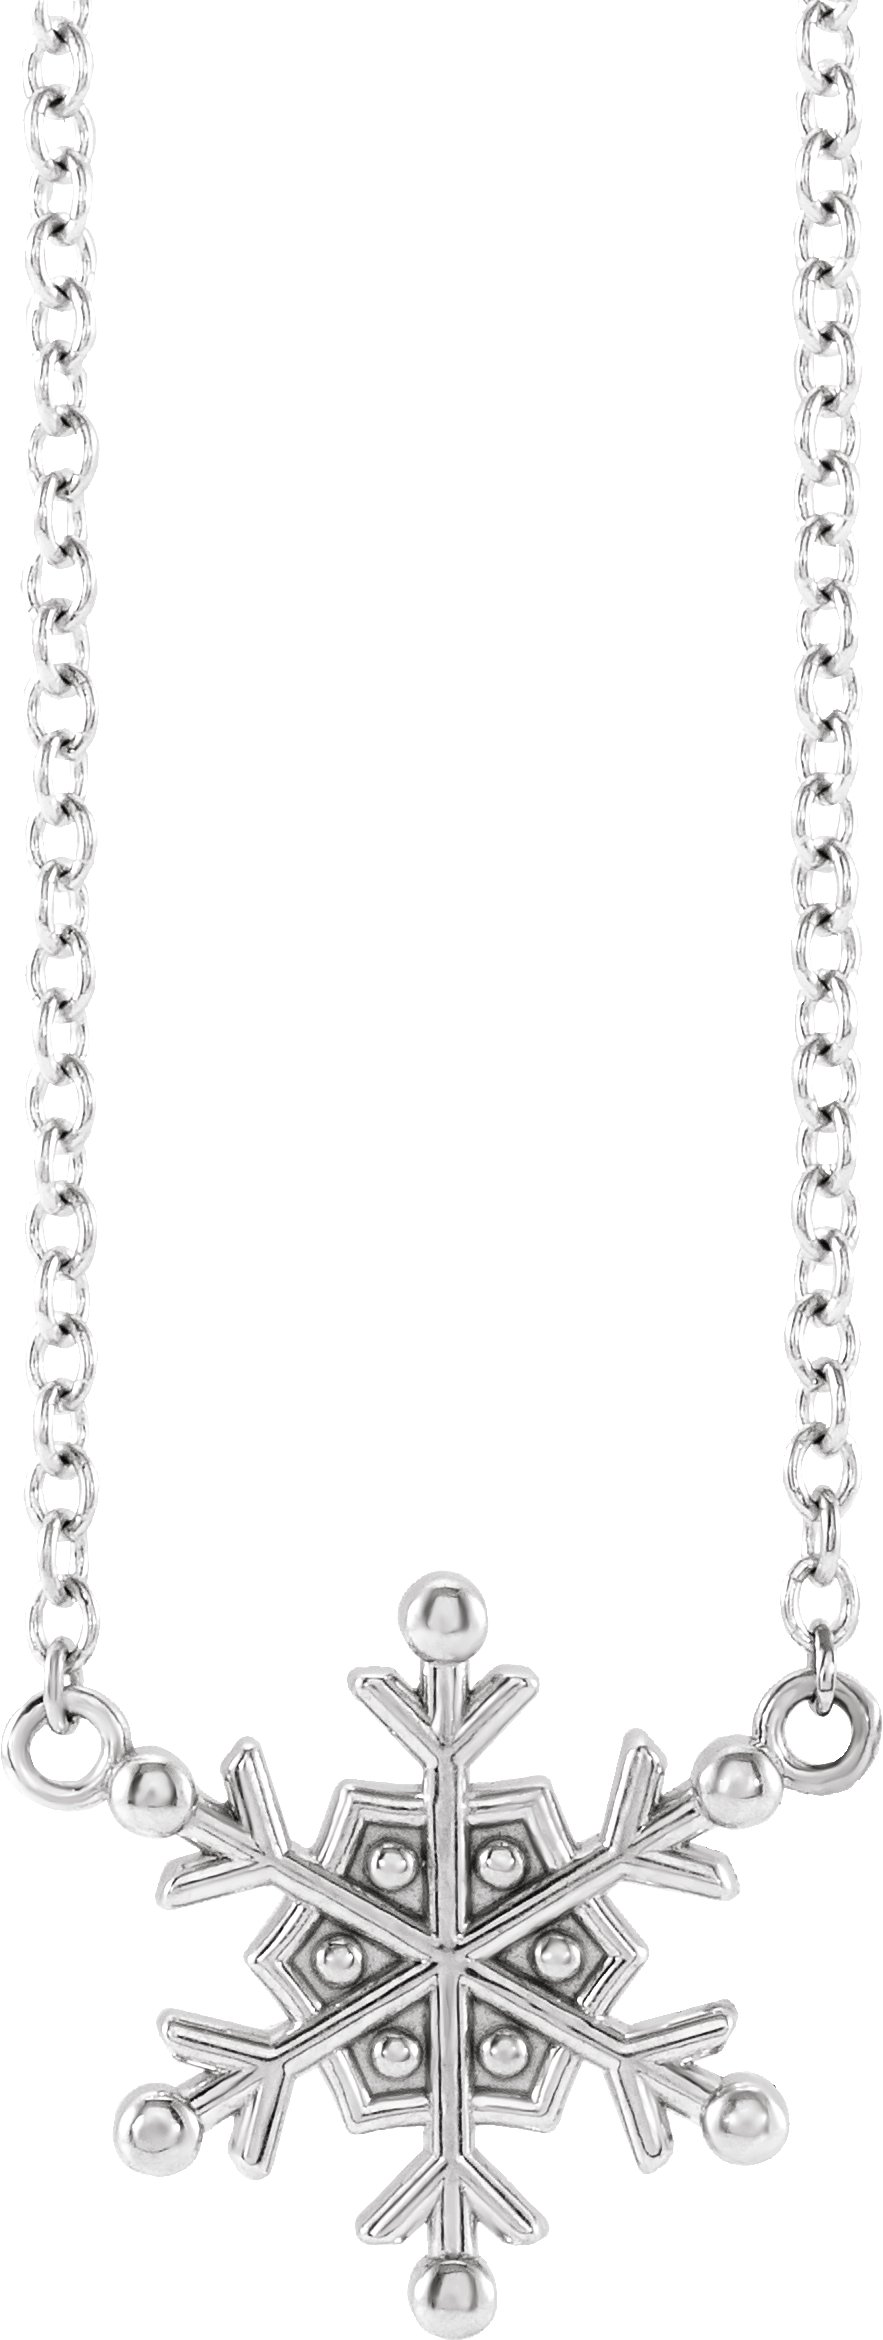 Sterling Silver Petite Snowflake 18" Necklace